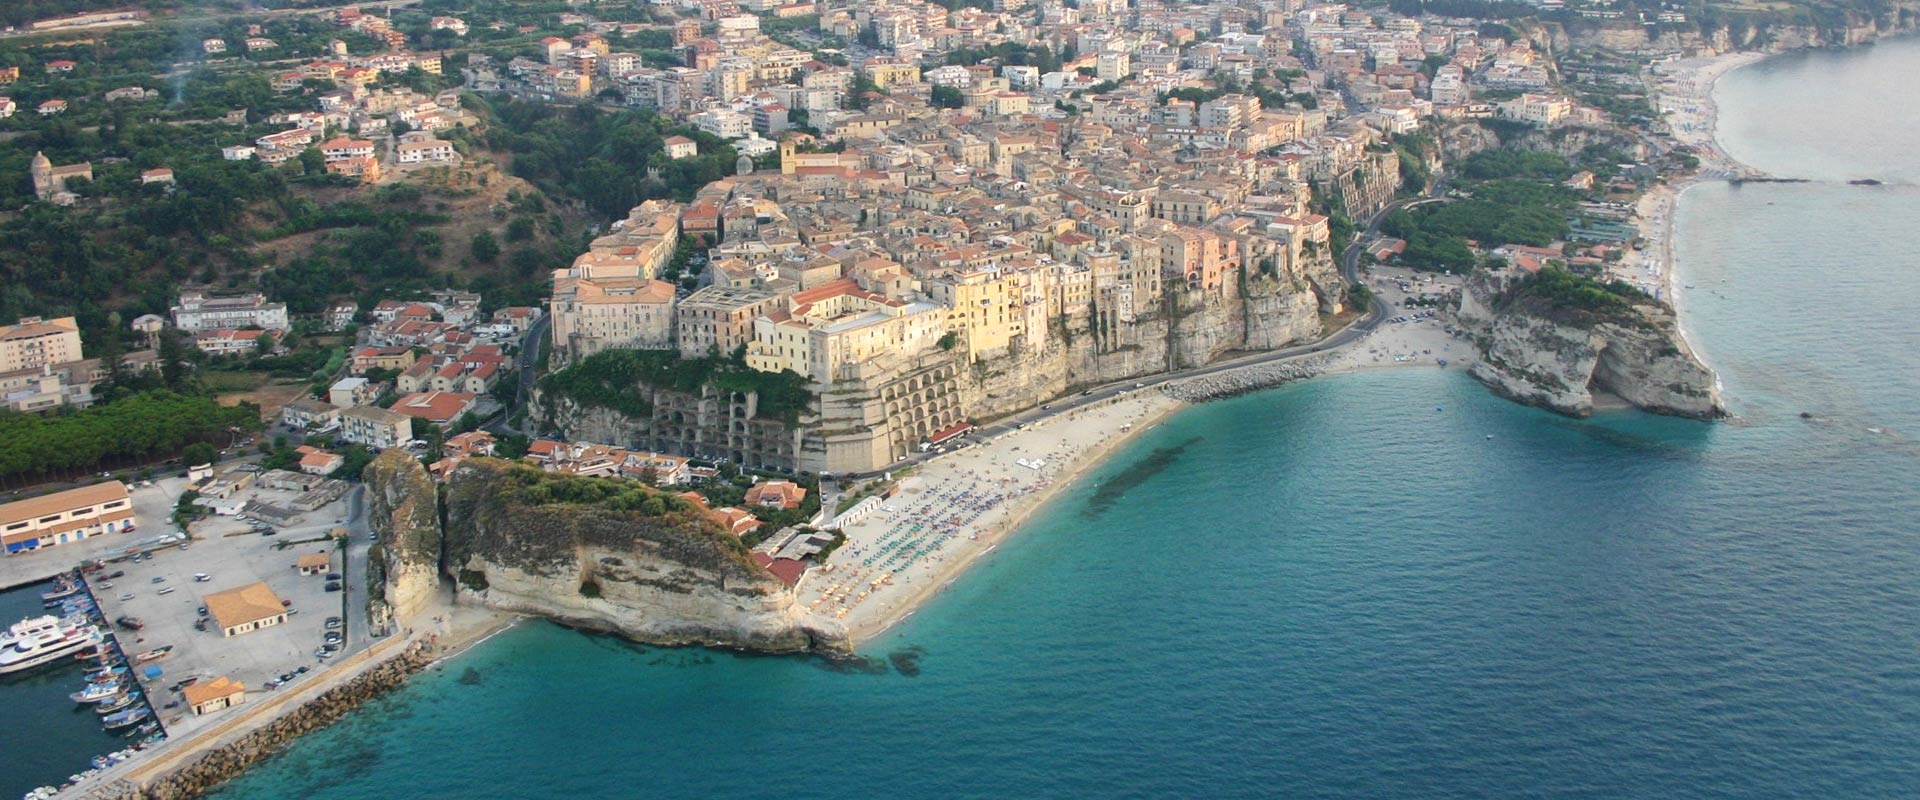 Welcome to Tropea